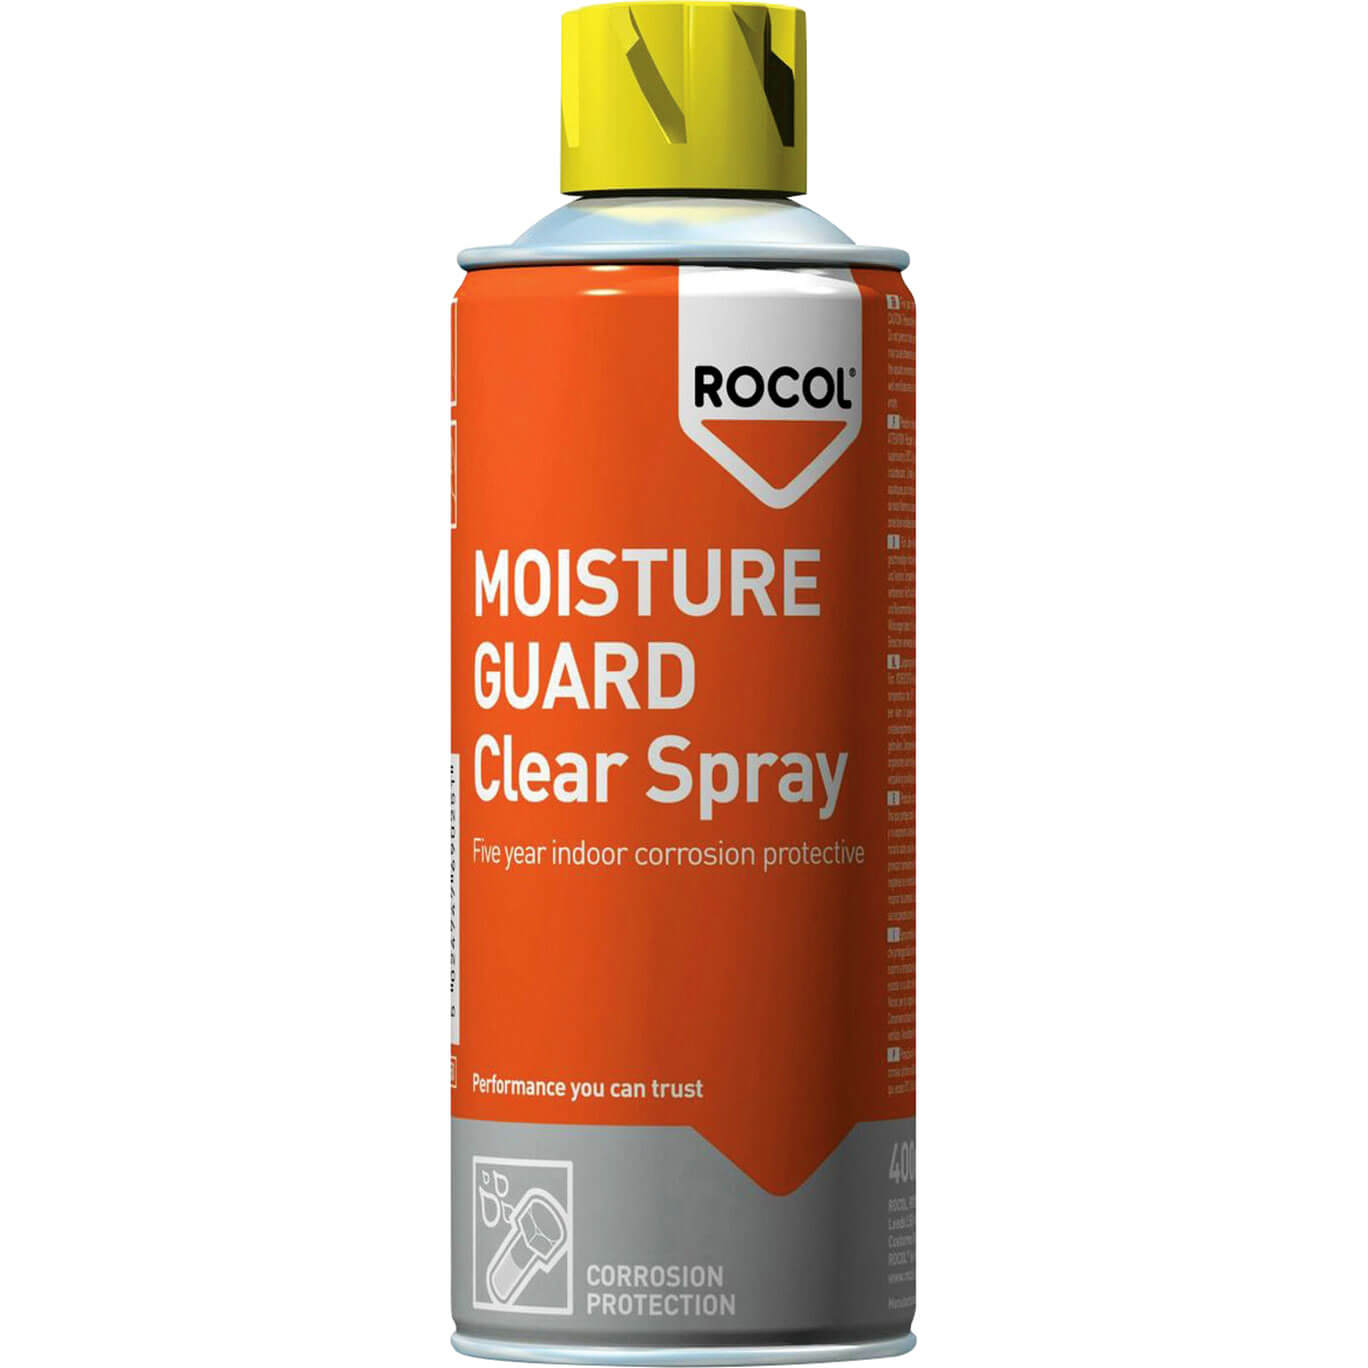 Image of Rocol Moisture Guard Indoor Corrosion Protection Spray 400ml Clear